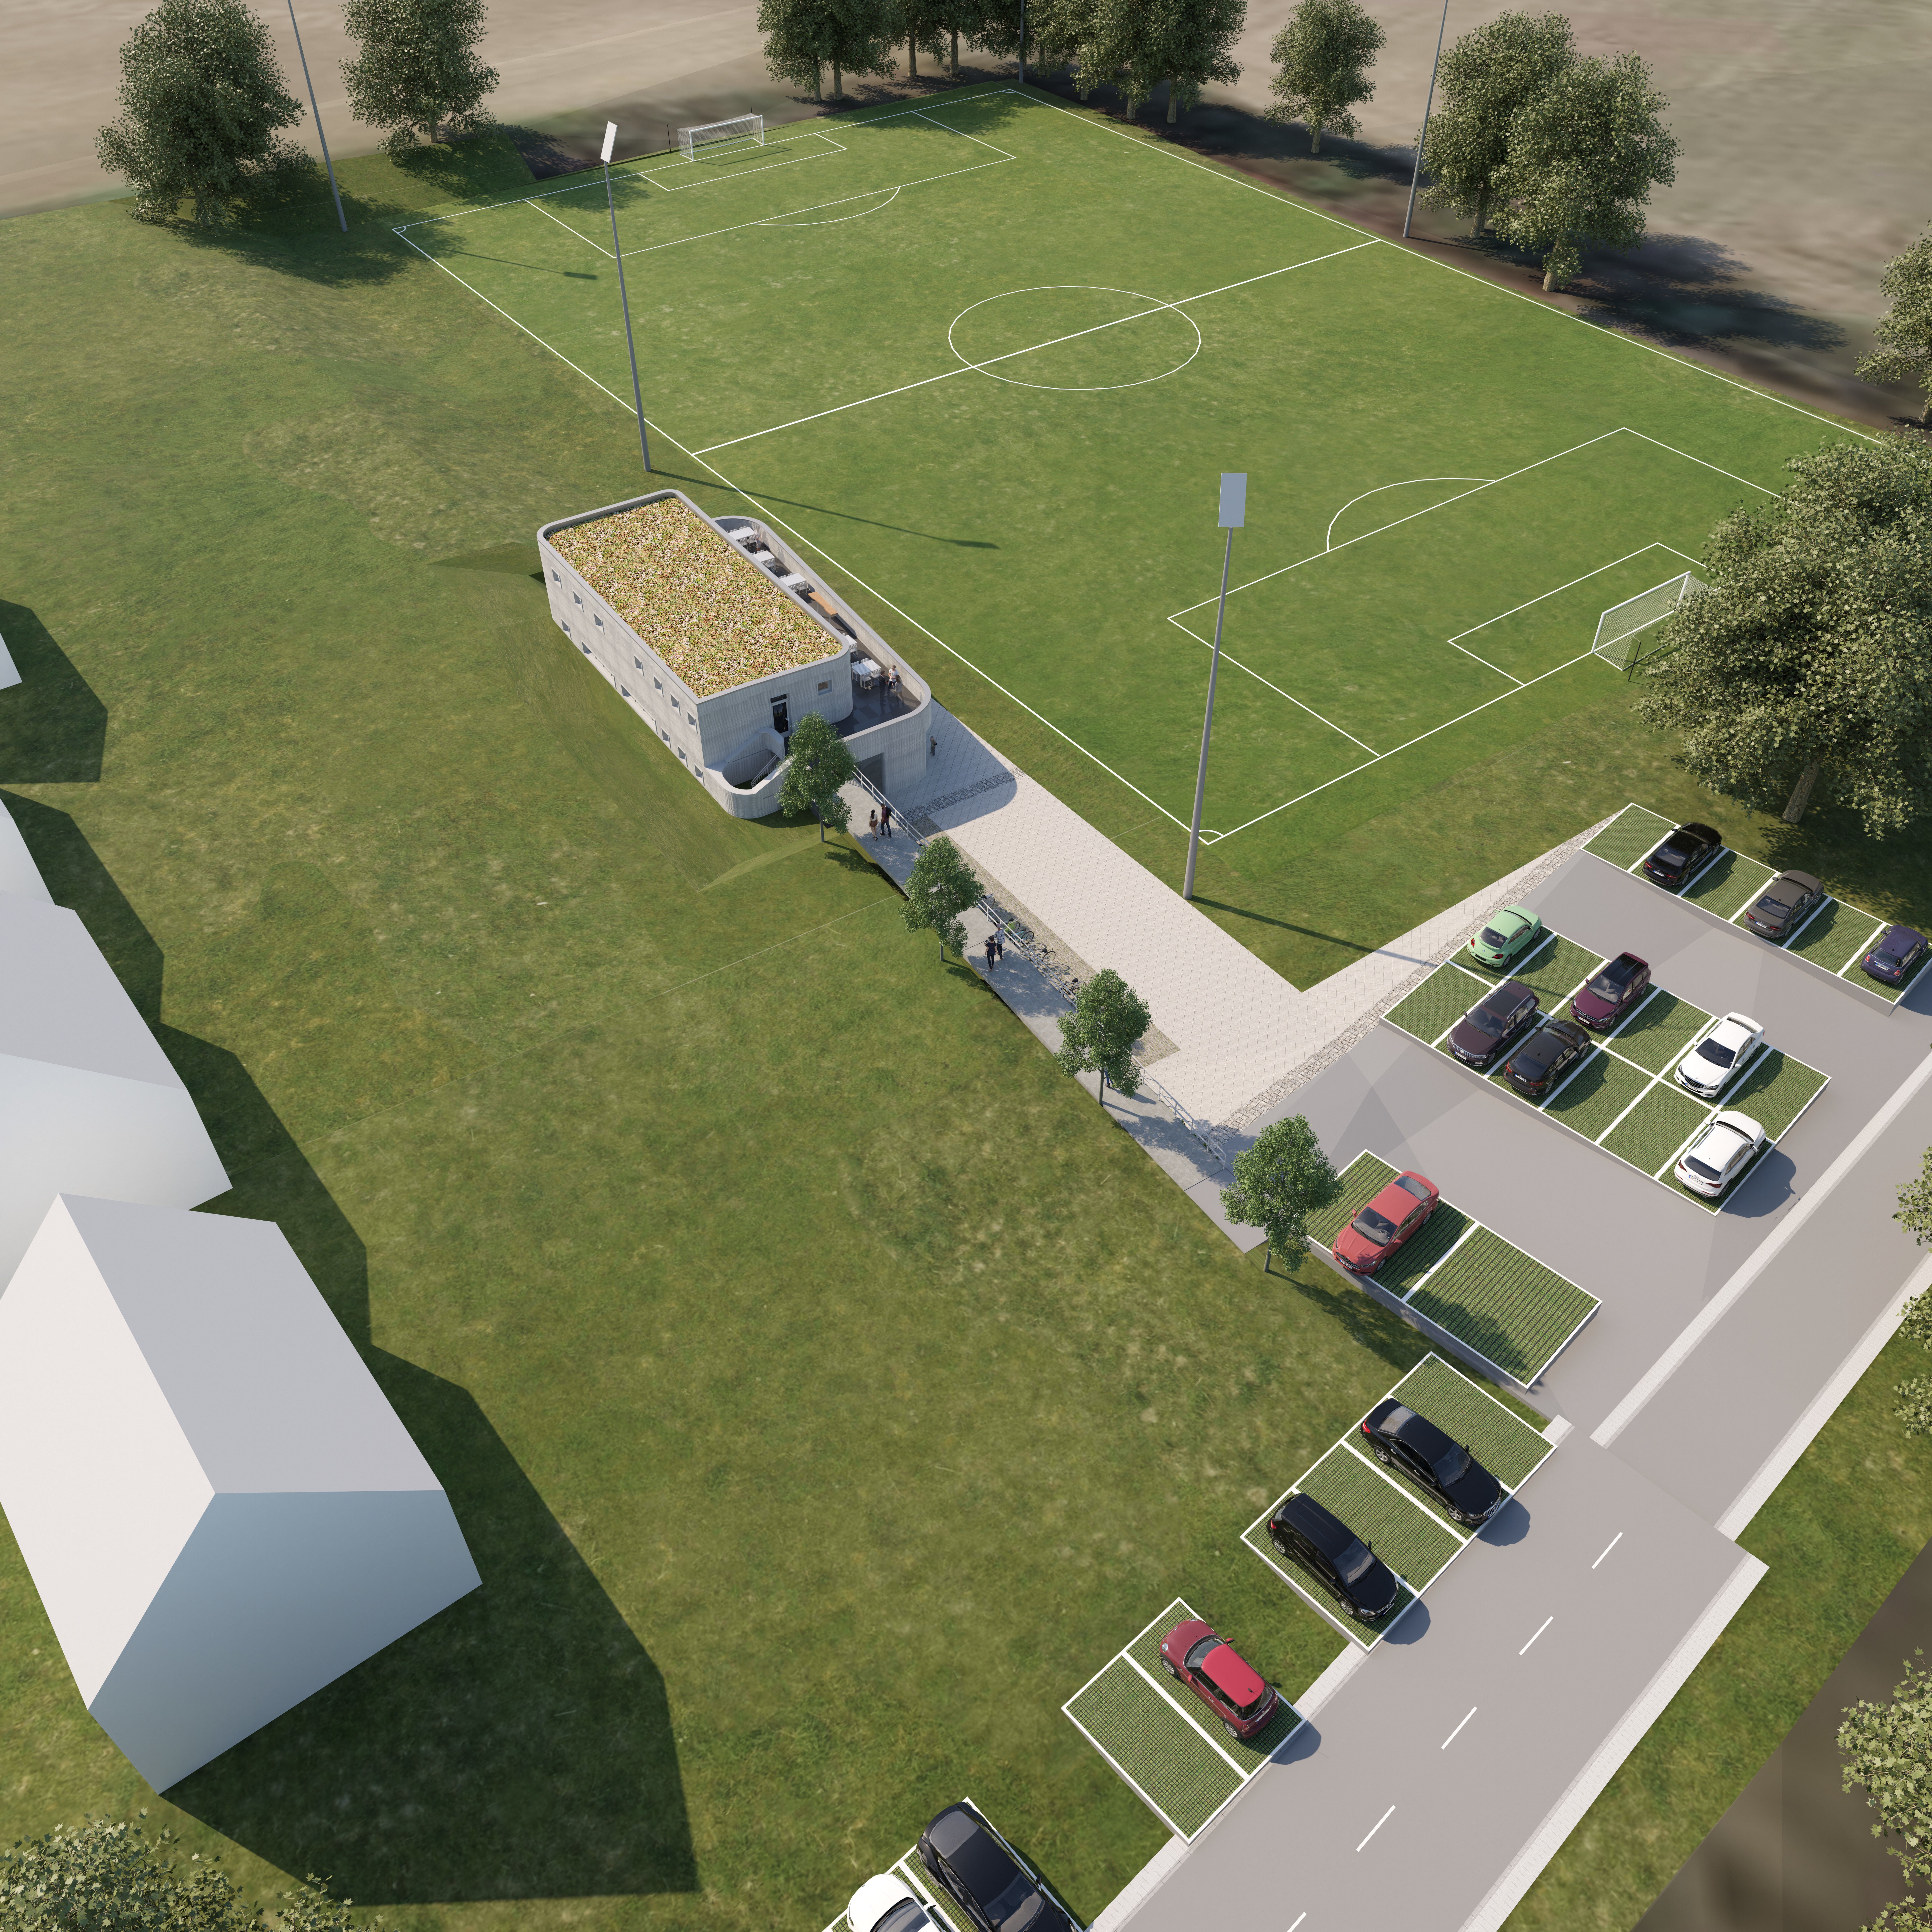 3D Printed SC Capelle football clubhouse